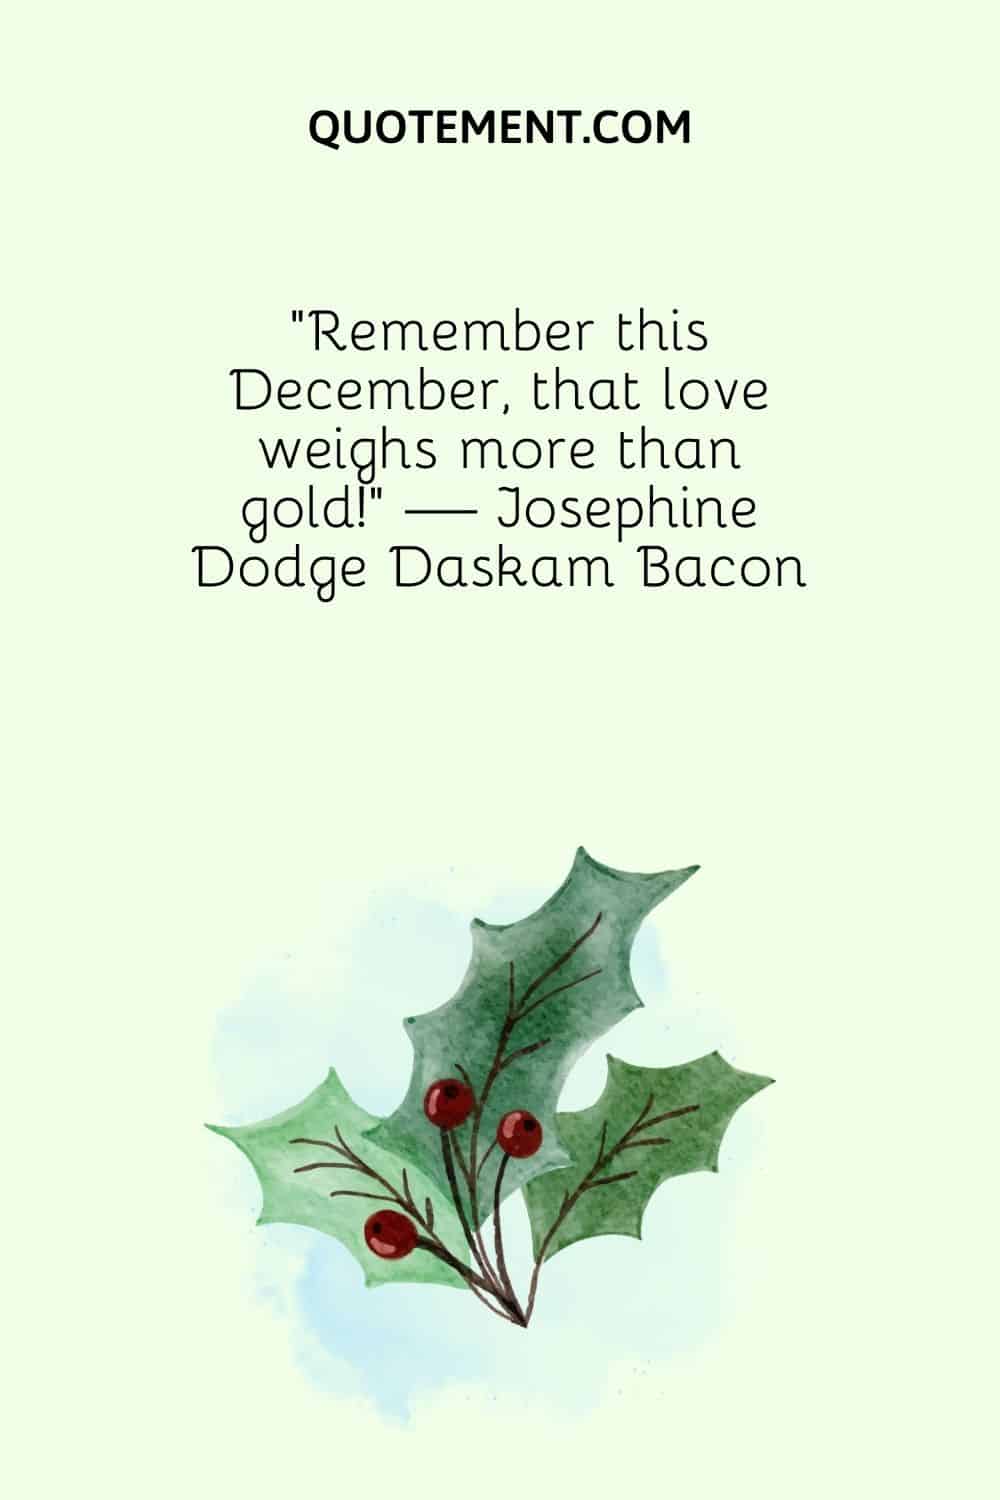 “Remember this December, that love weighs more than gold!” — Josephine Dodge Daskam Bacon